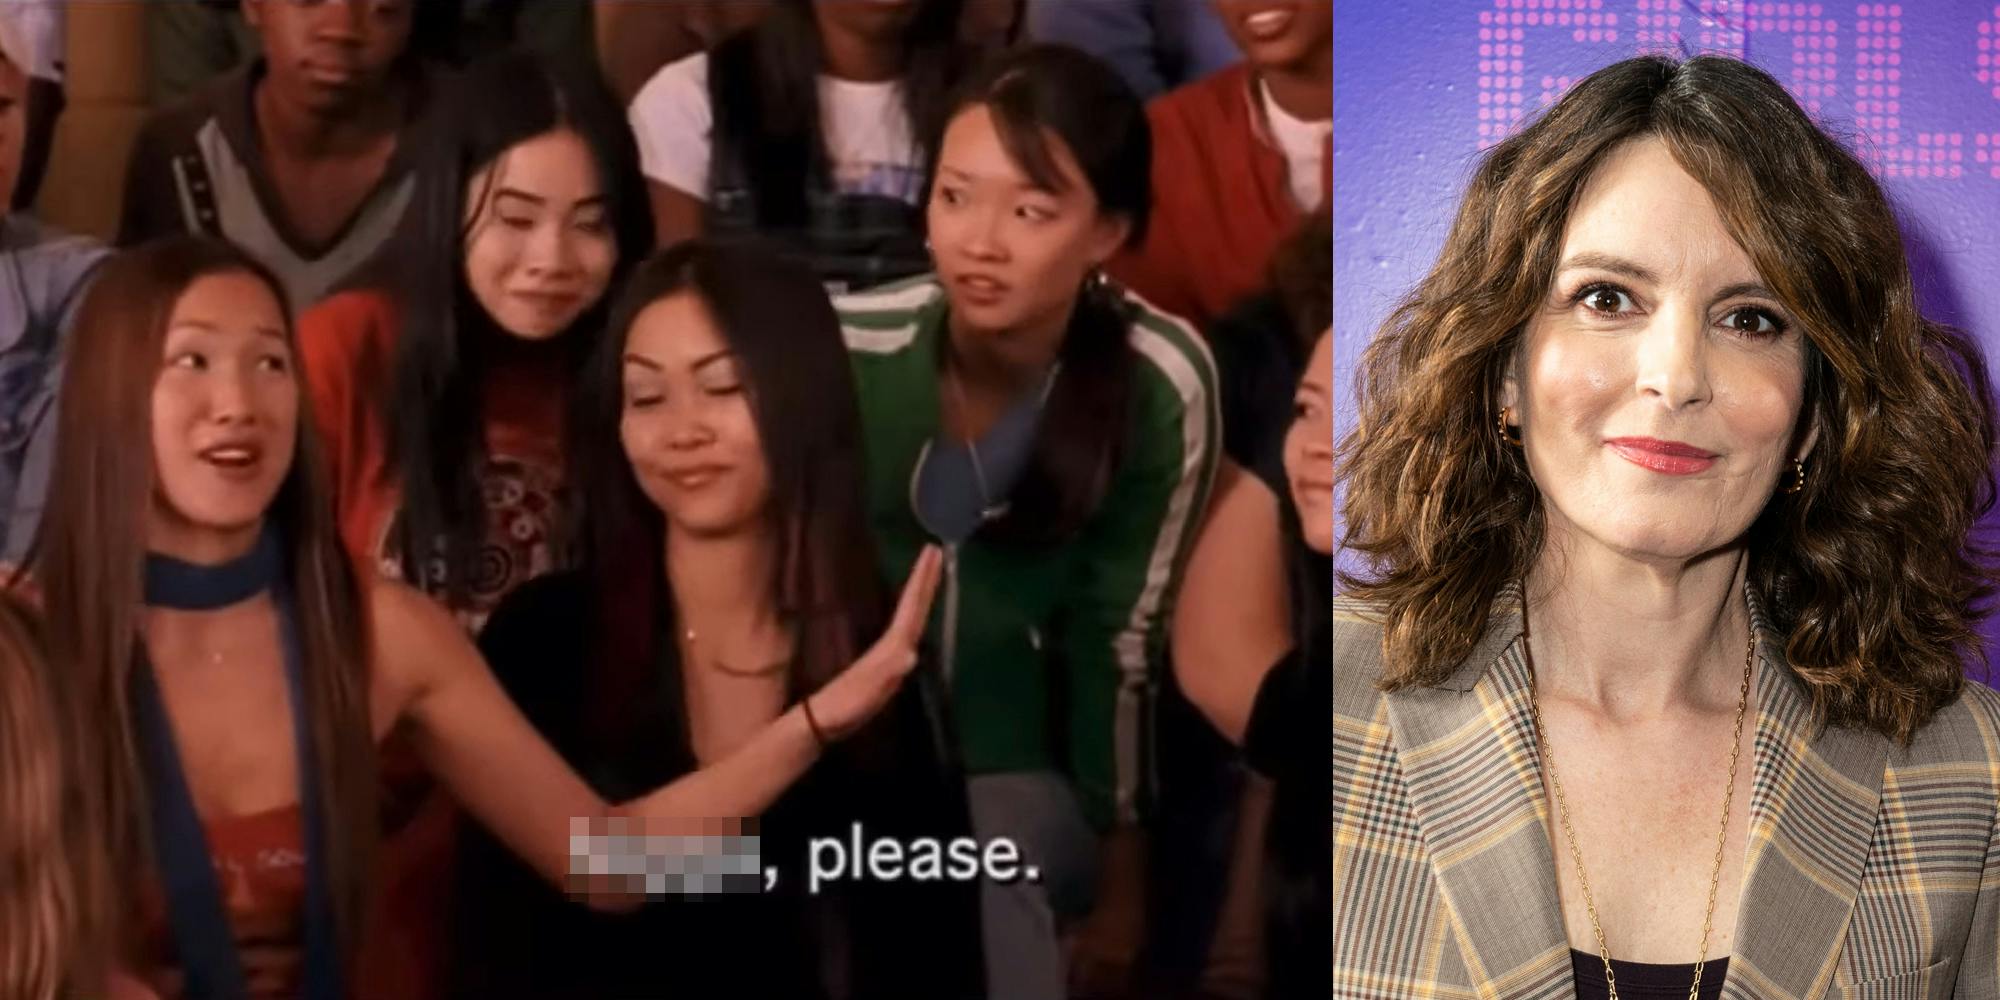 actors in Mean Girls speaking with caption "blank, please." (l) Tina Fey in front of purple background (r)